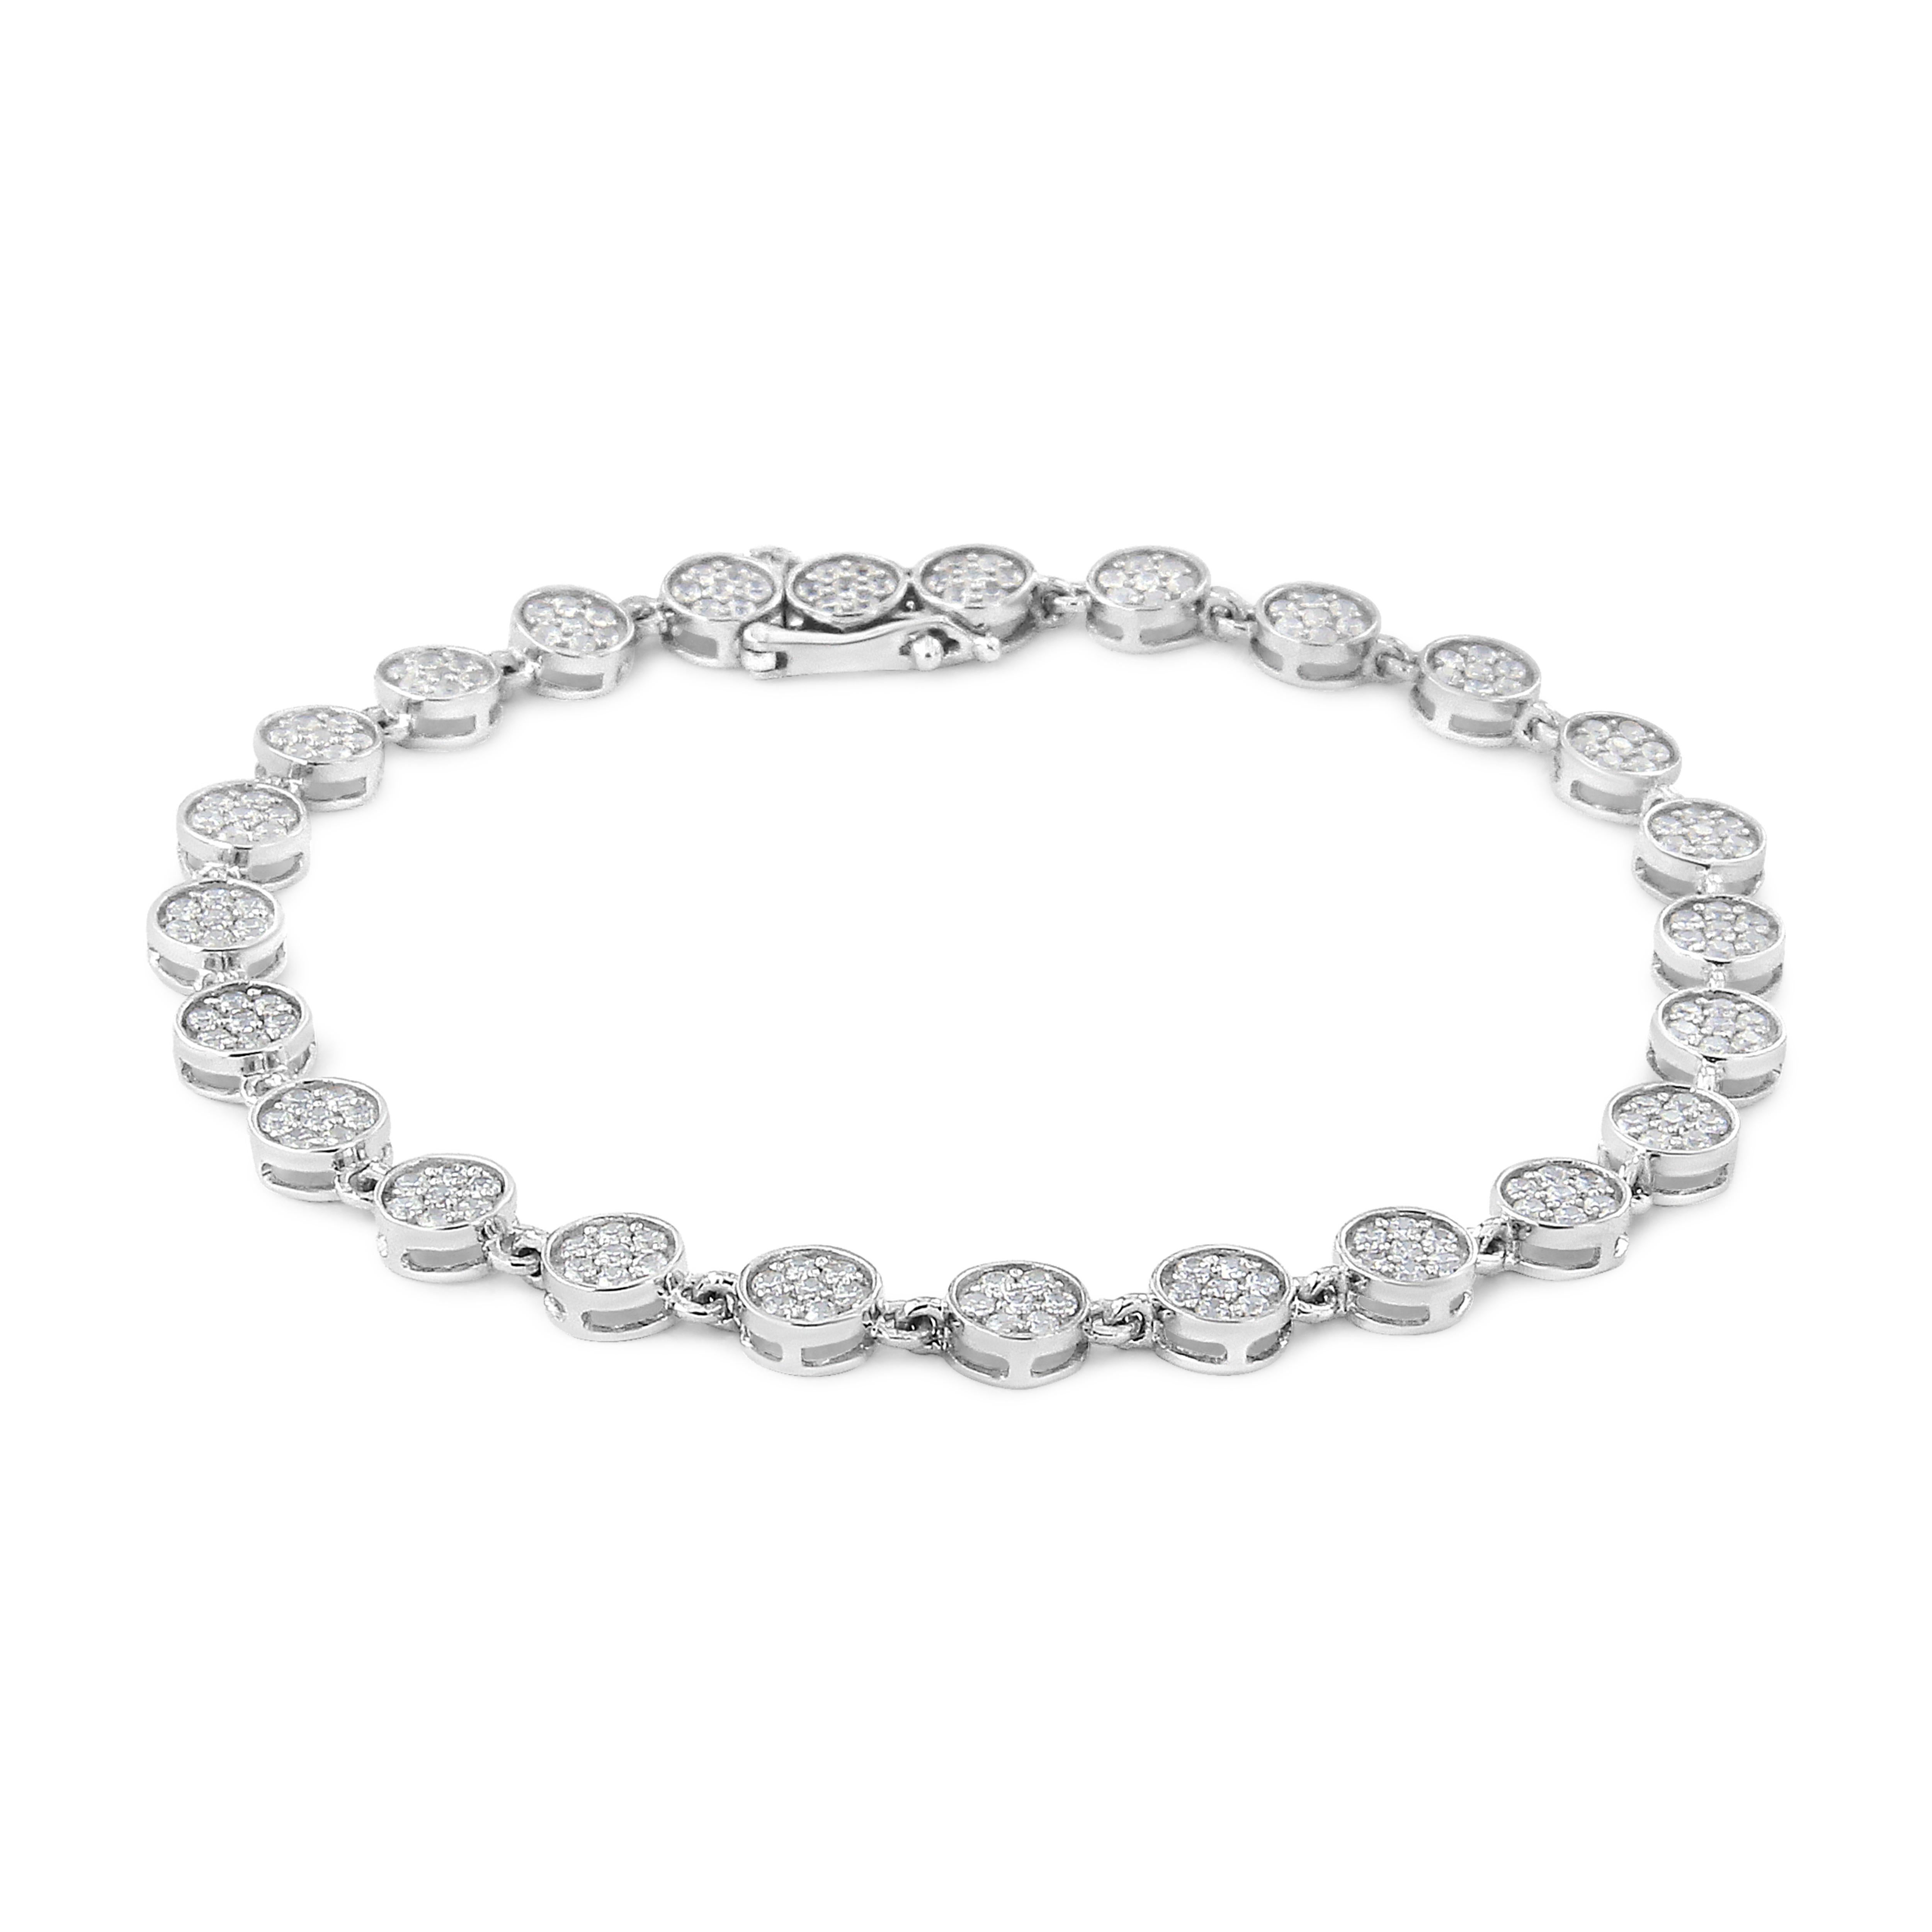 Flash effortless beauty with this stylish diamond link bracelet. This sterling silver diamond link bracelet presents the same striking allure as your favorite little black dress, but with a sparkling twist. Accentuated with 175 diamonds, this piece